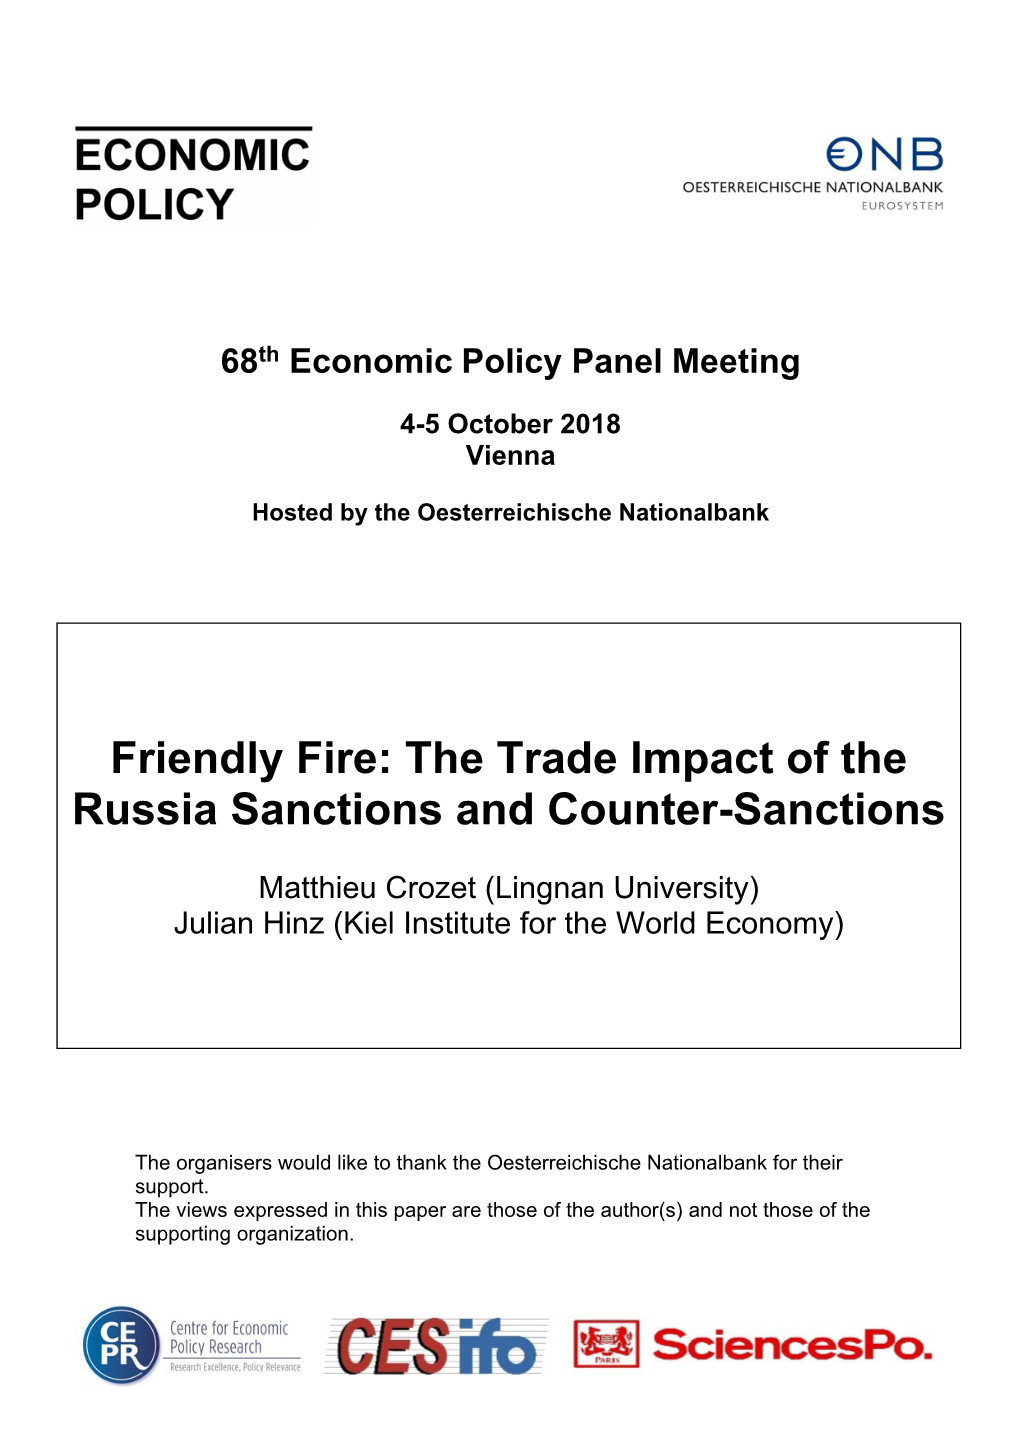 Friendly Fire: the Trade Impact of the Russia Sanctions and Counter-Sanctions